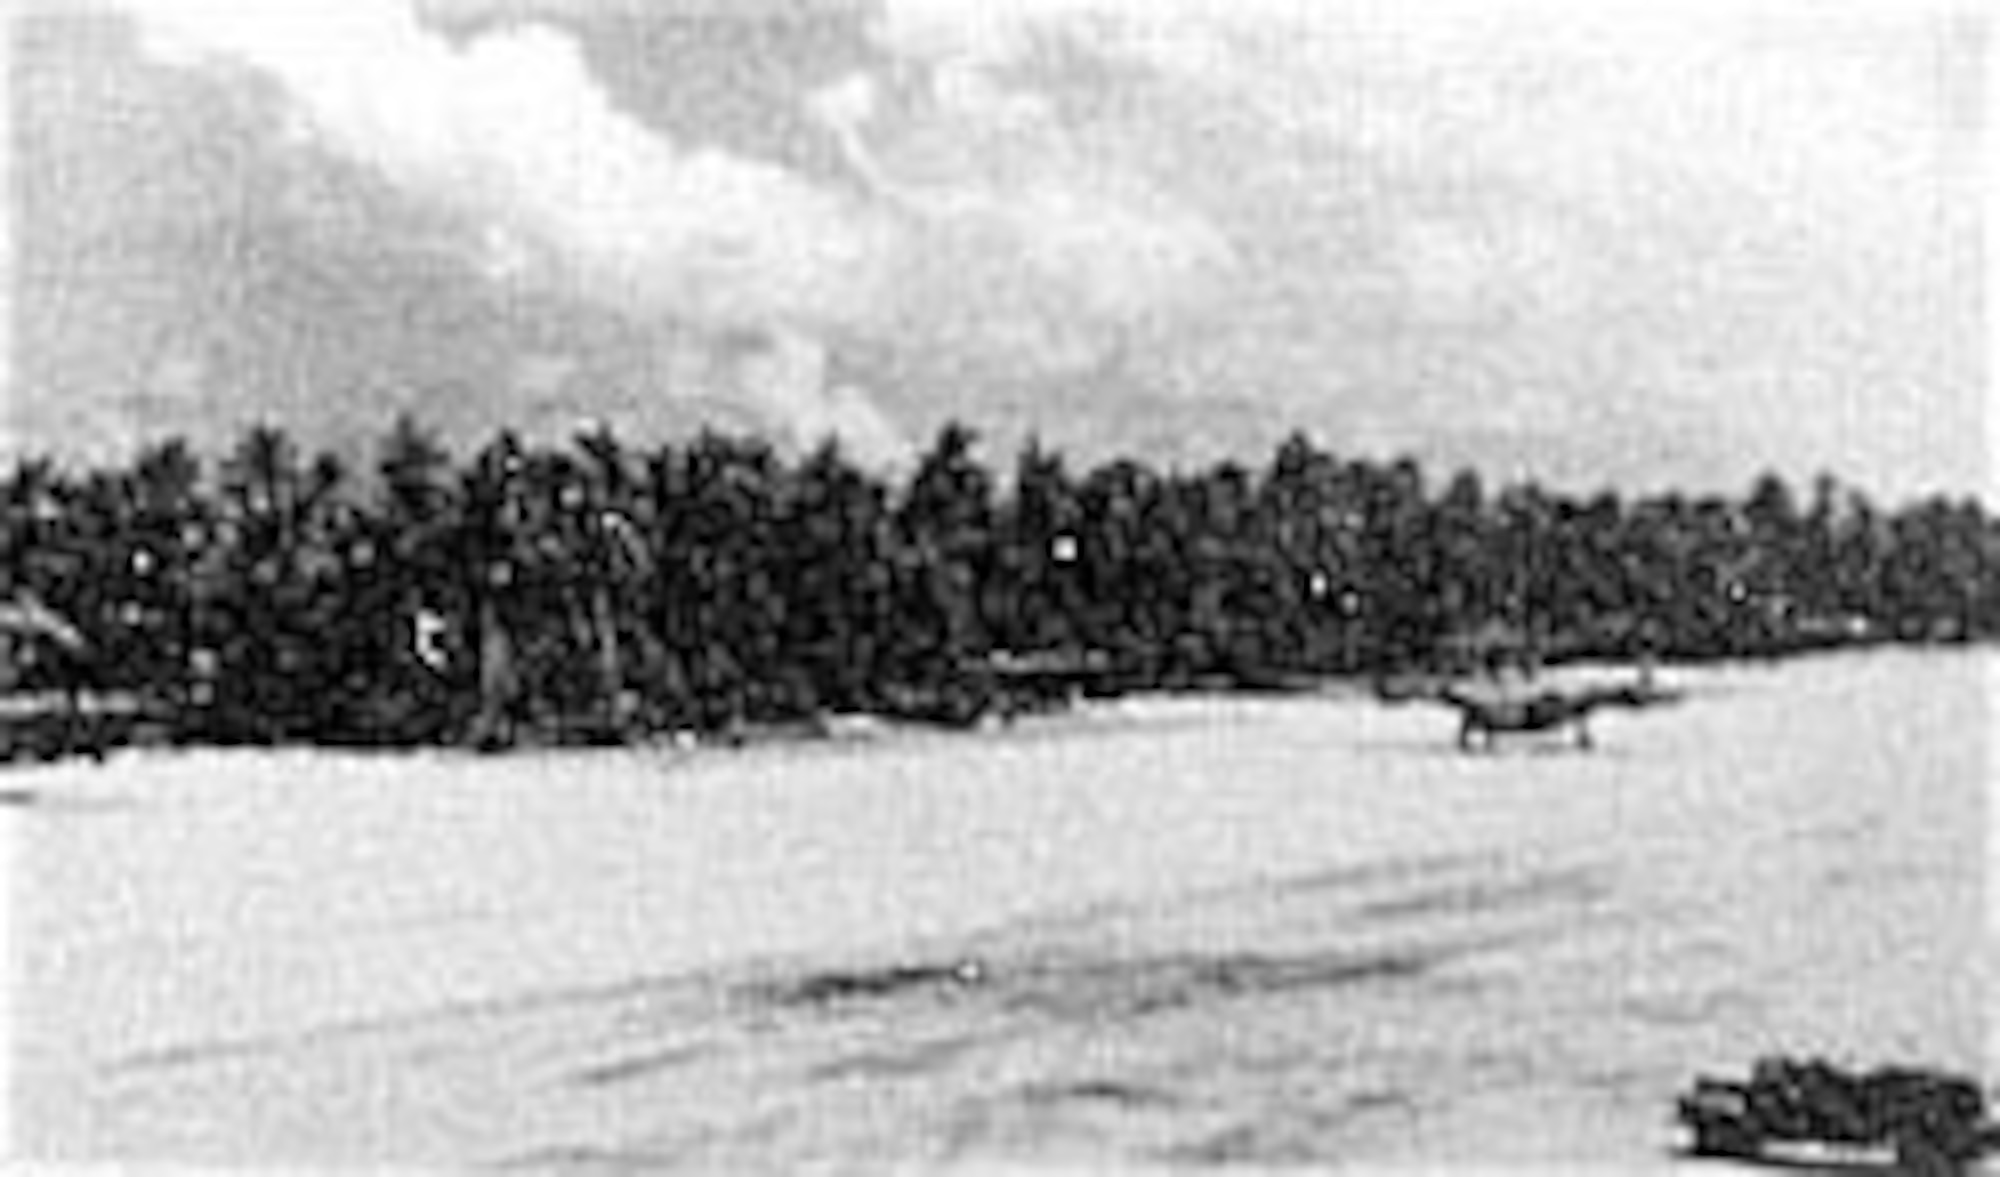 A B-24 lands at Nanumea in the Ellice Islands in December 1943. The field was a refueling stop for 7th Air Force bombers flying long-range missions against the Gilberts. Additional B-24s are dispersed in revetments along the runway. (U.S. Air Force photo)